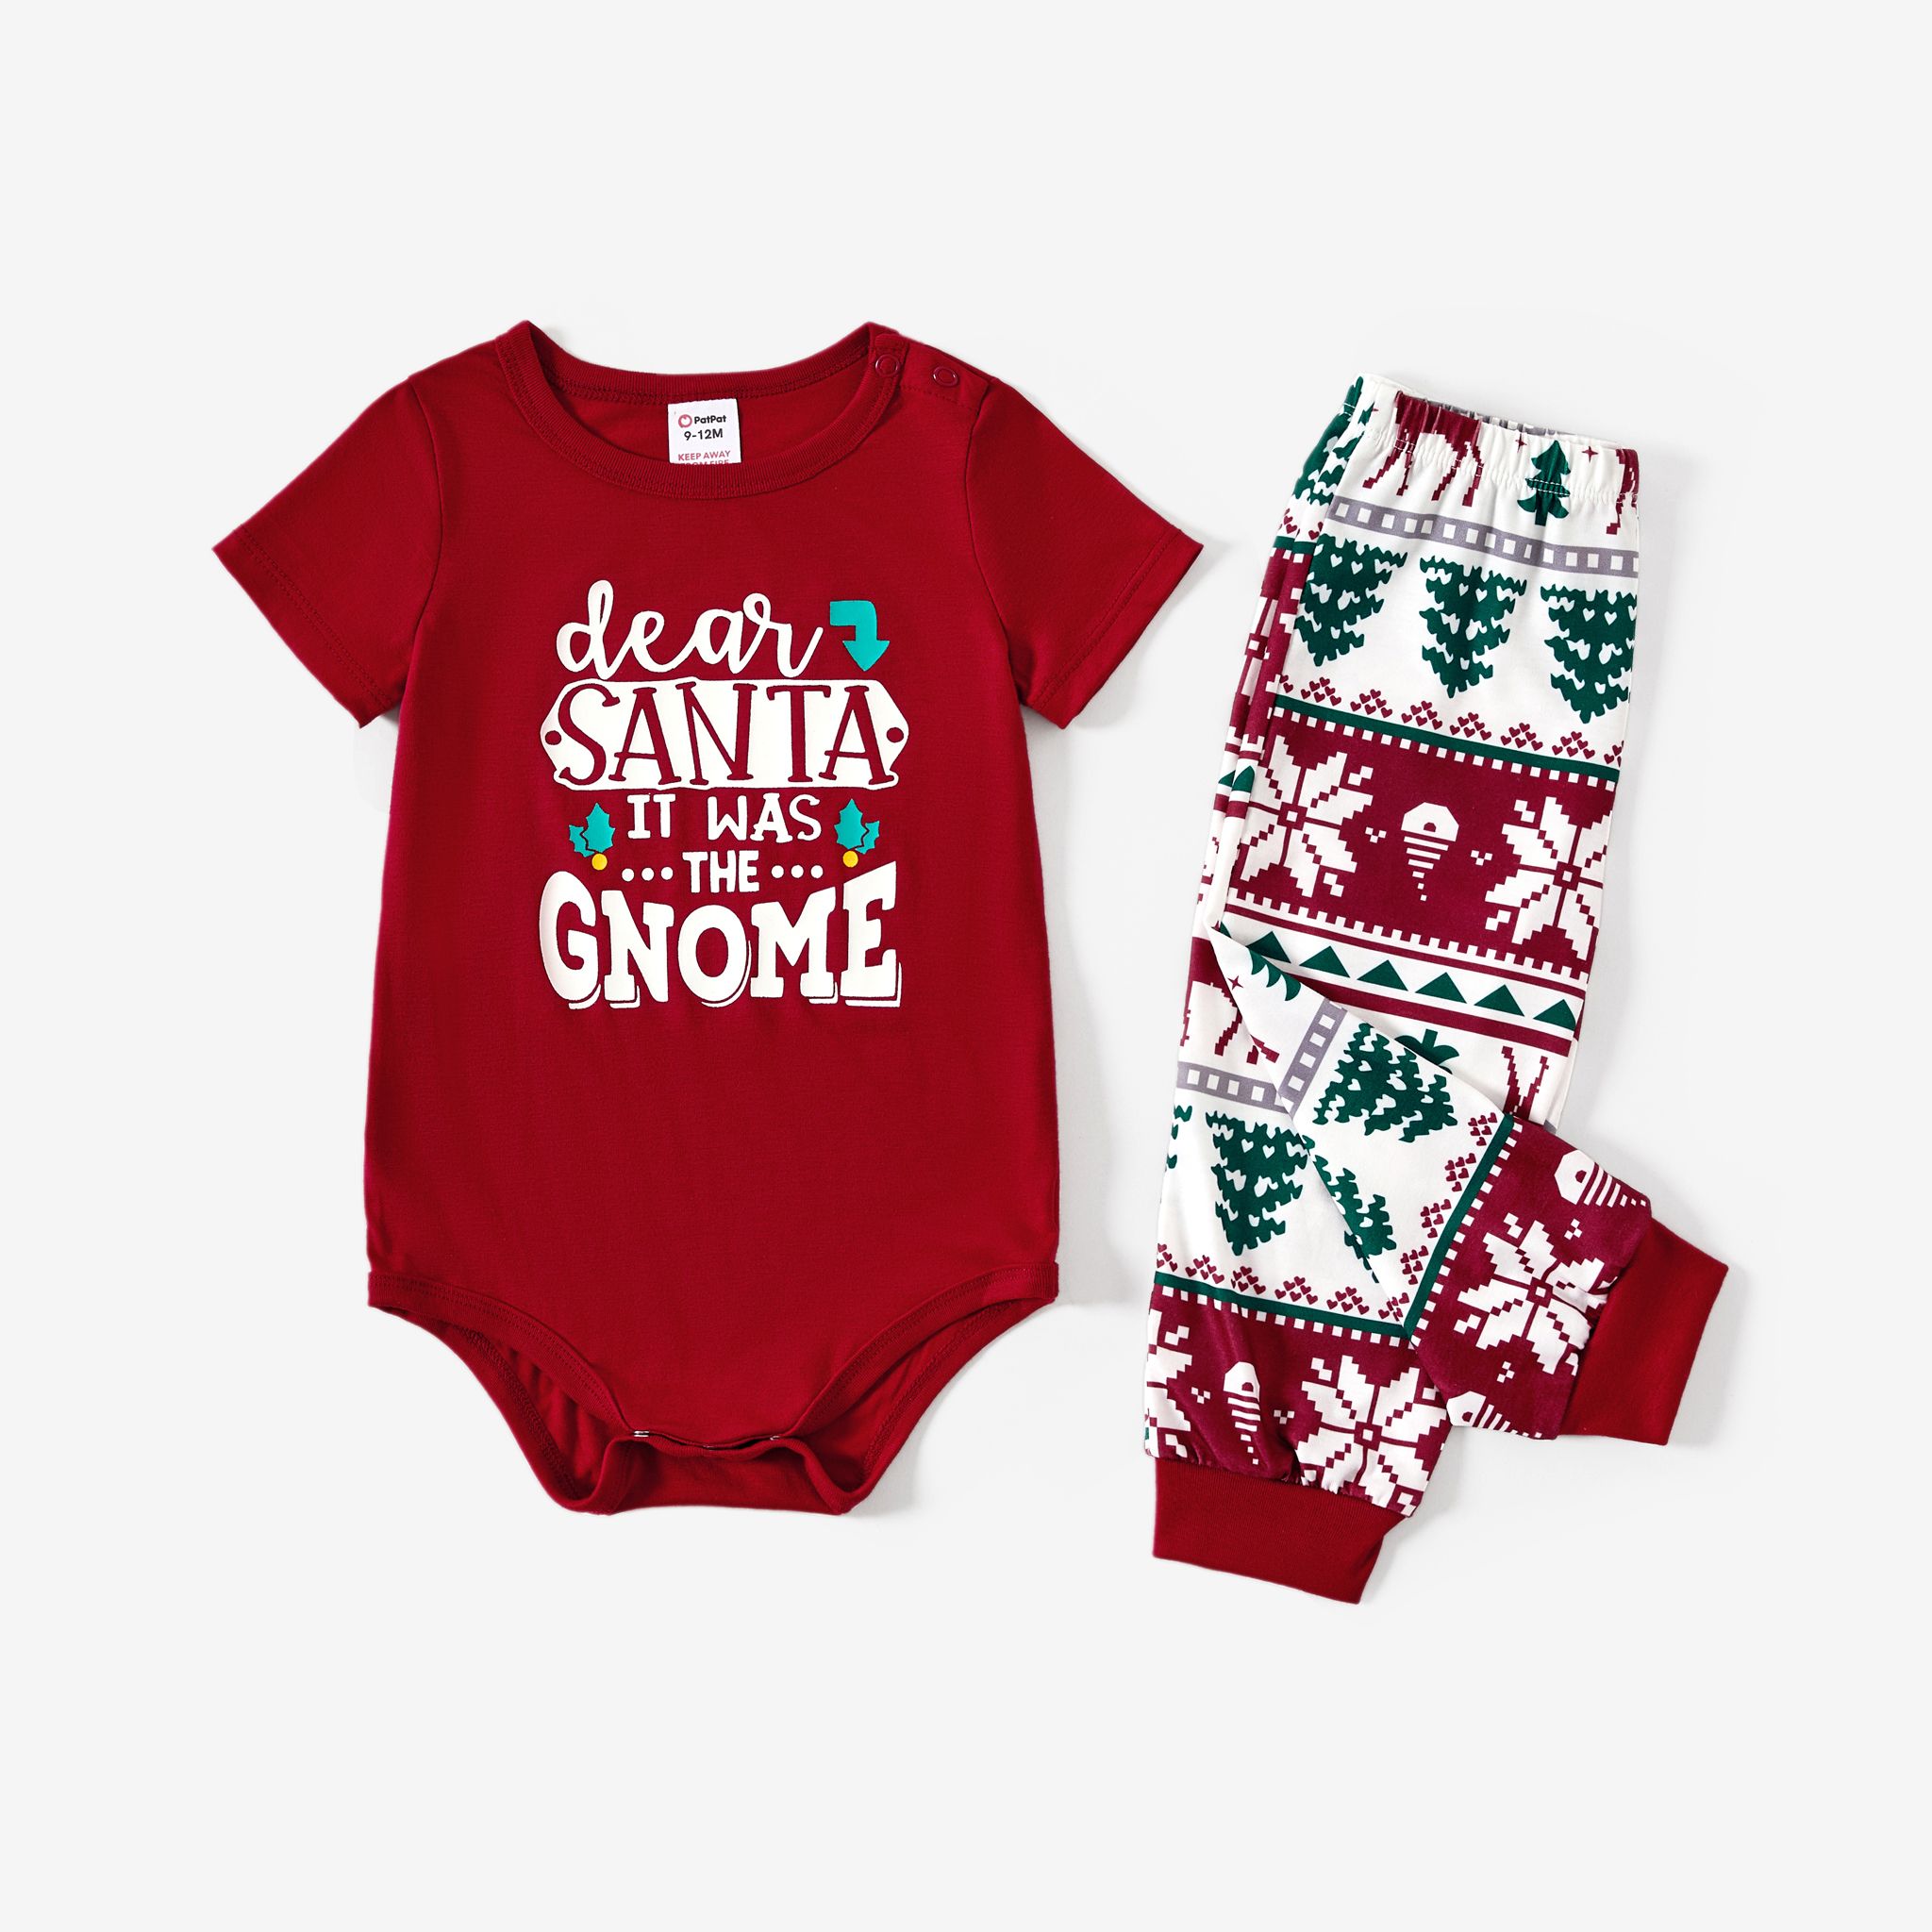 Christmas Family Matching Festival Theme&Letters Print Short-sleeve Pajamas Sets(Flame Resistant)